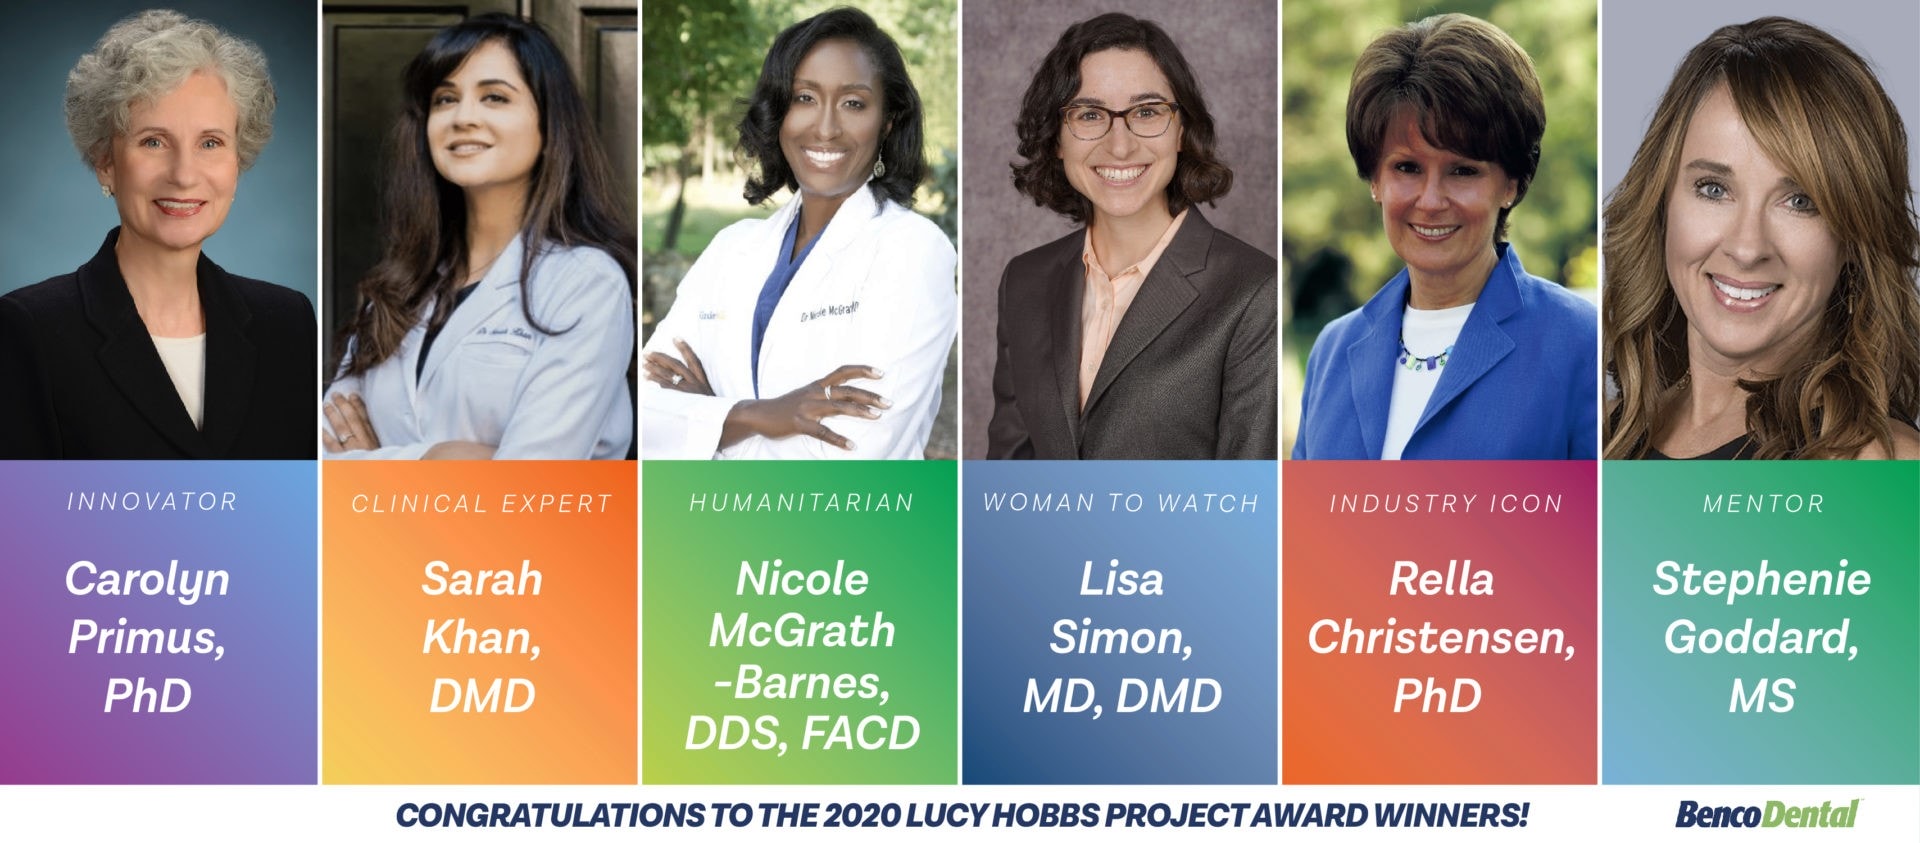 A collage of the six women being honored by the 2020 Lucy Hobbs Project awards.